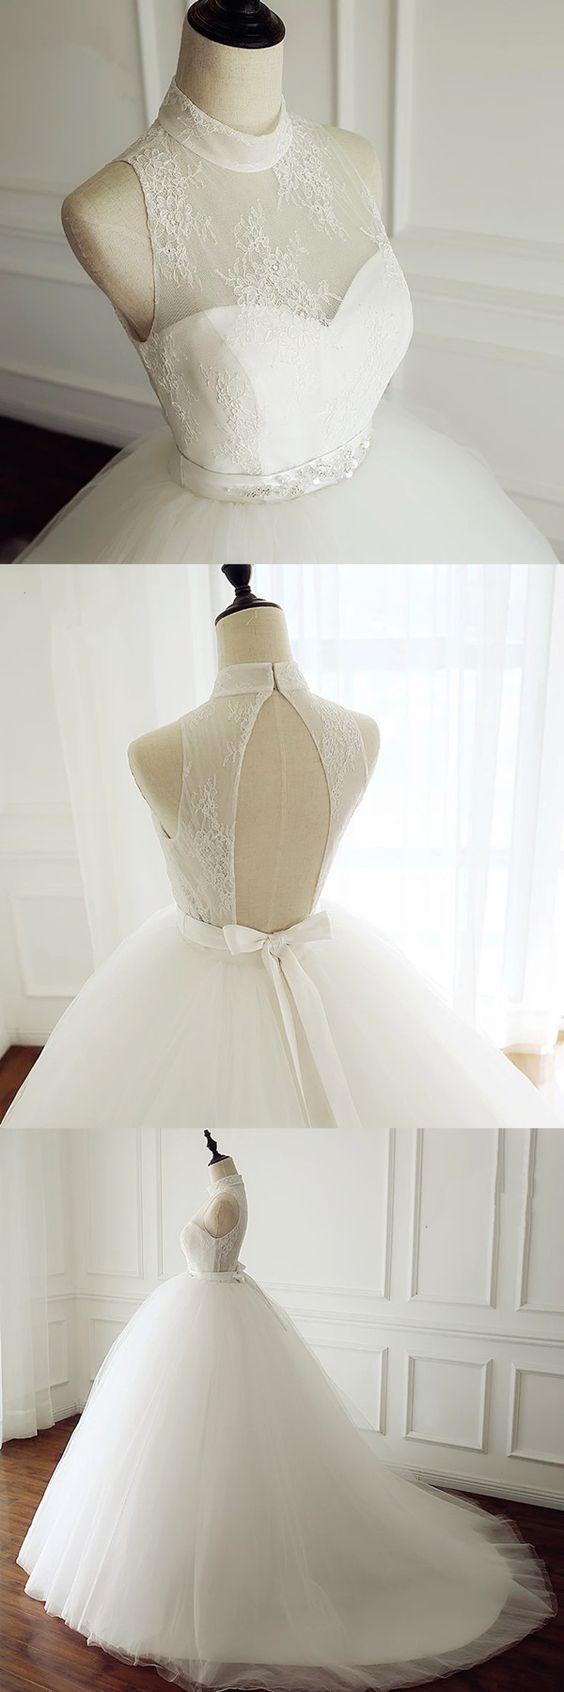 High Neck Open Back Tulle Ball Gown Wedding Dresses,w329